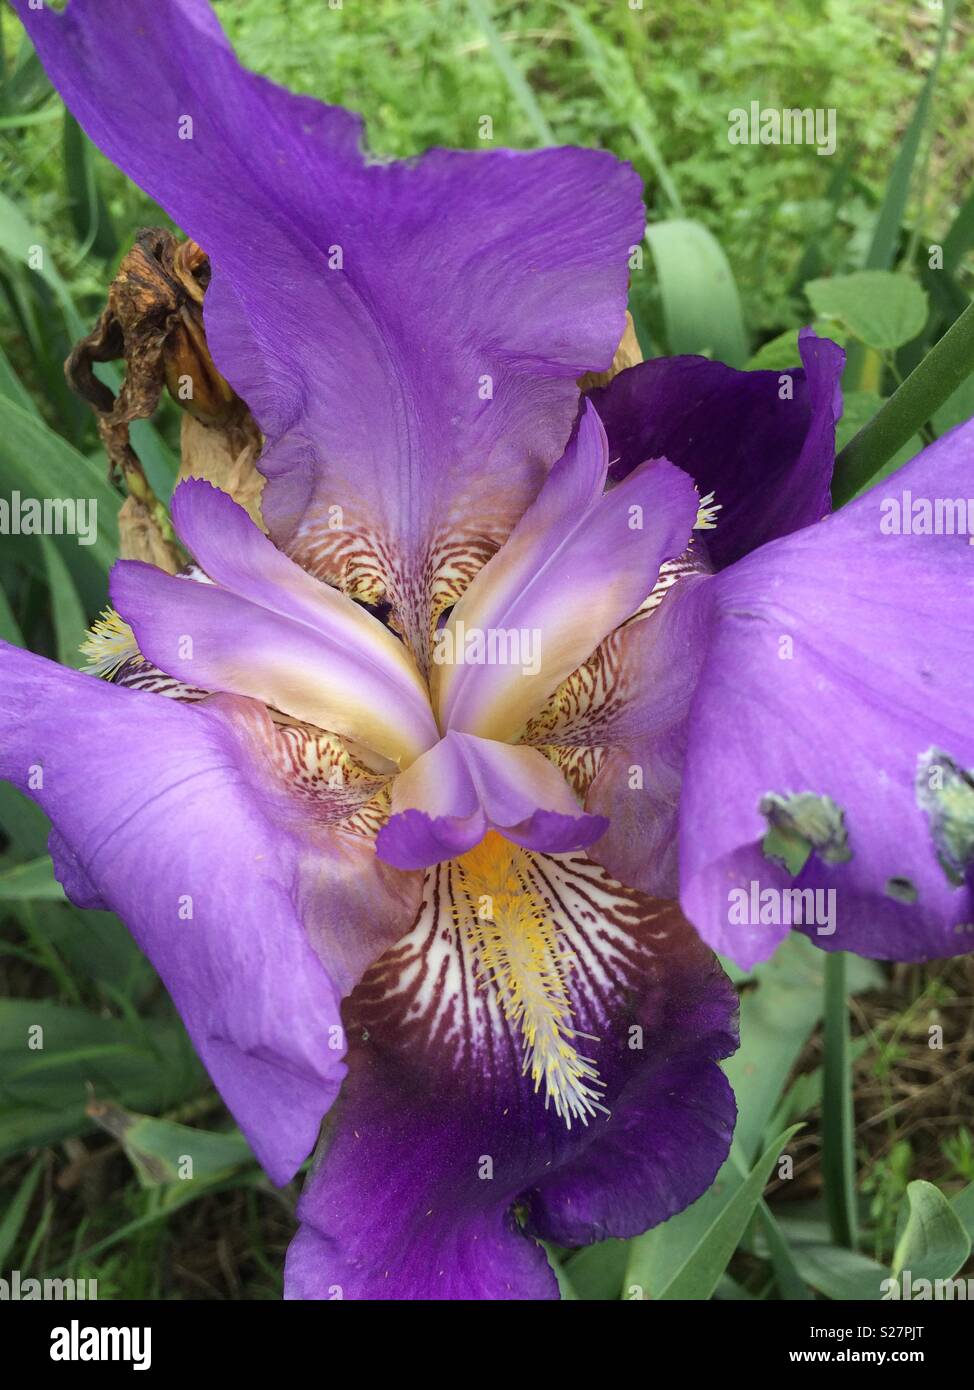 Love when these flowers bloom in my yard every year. They are my favorite color, purple. Stock Photo